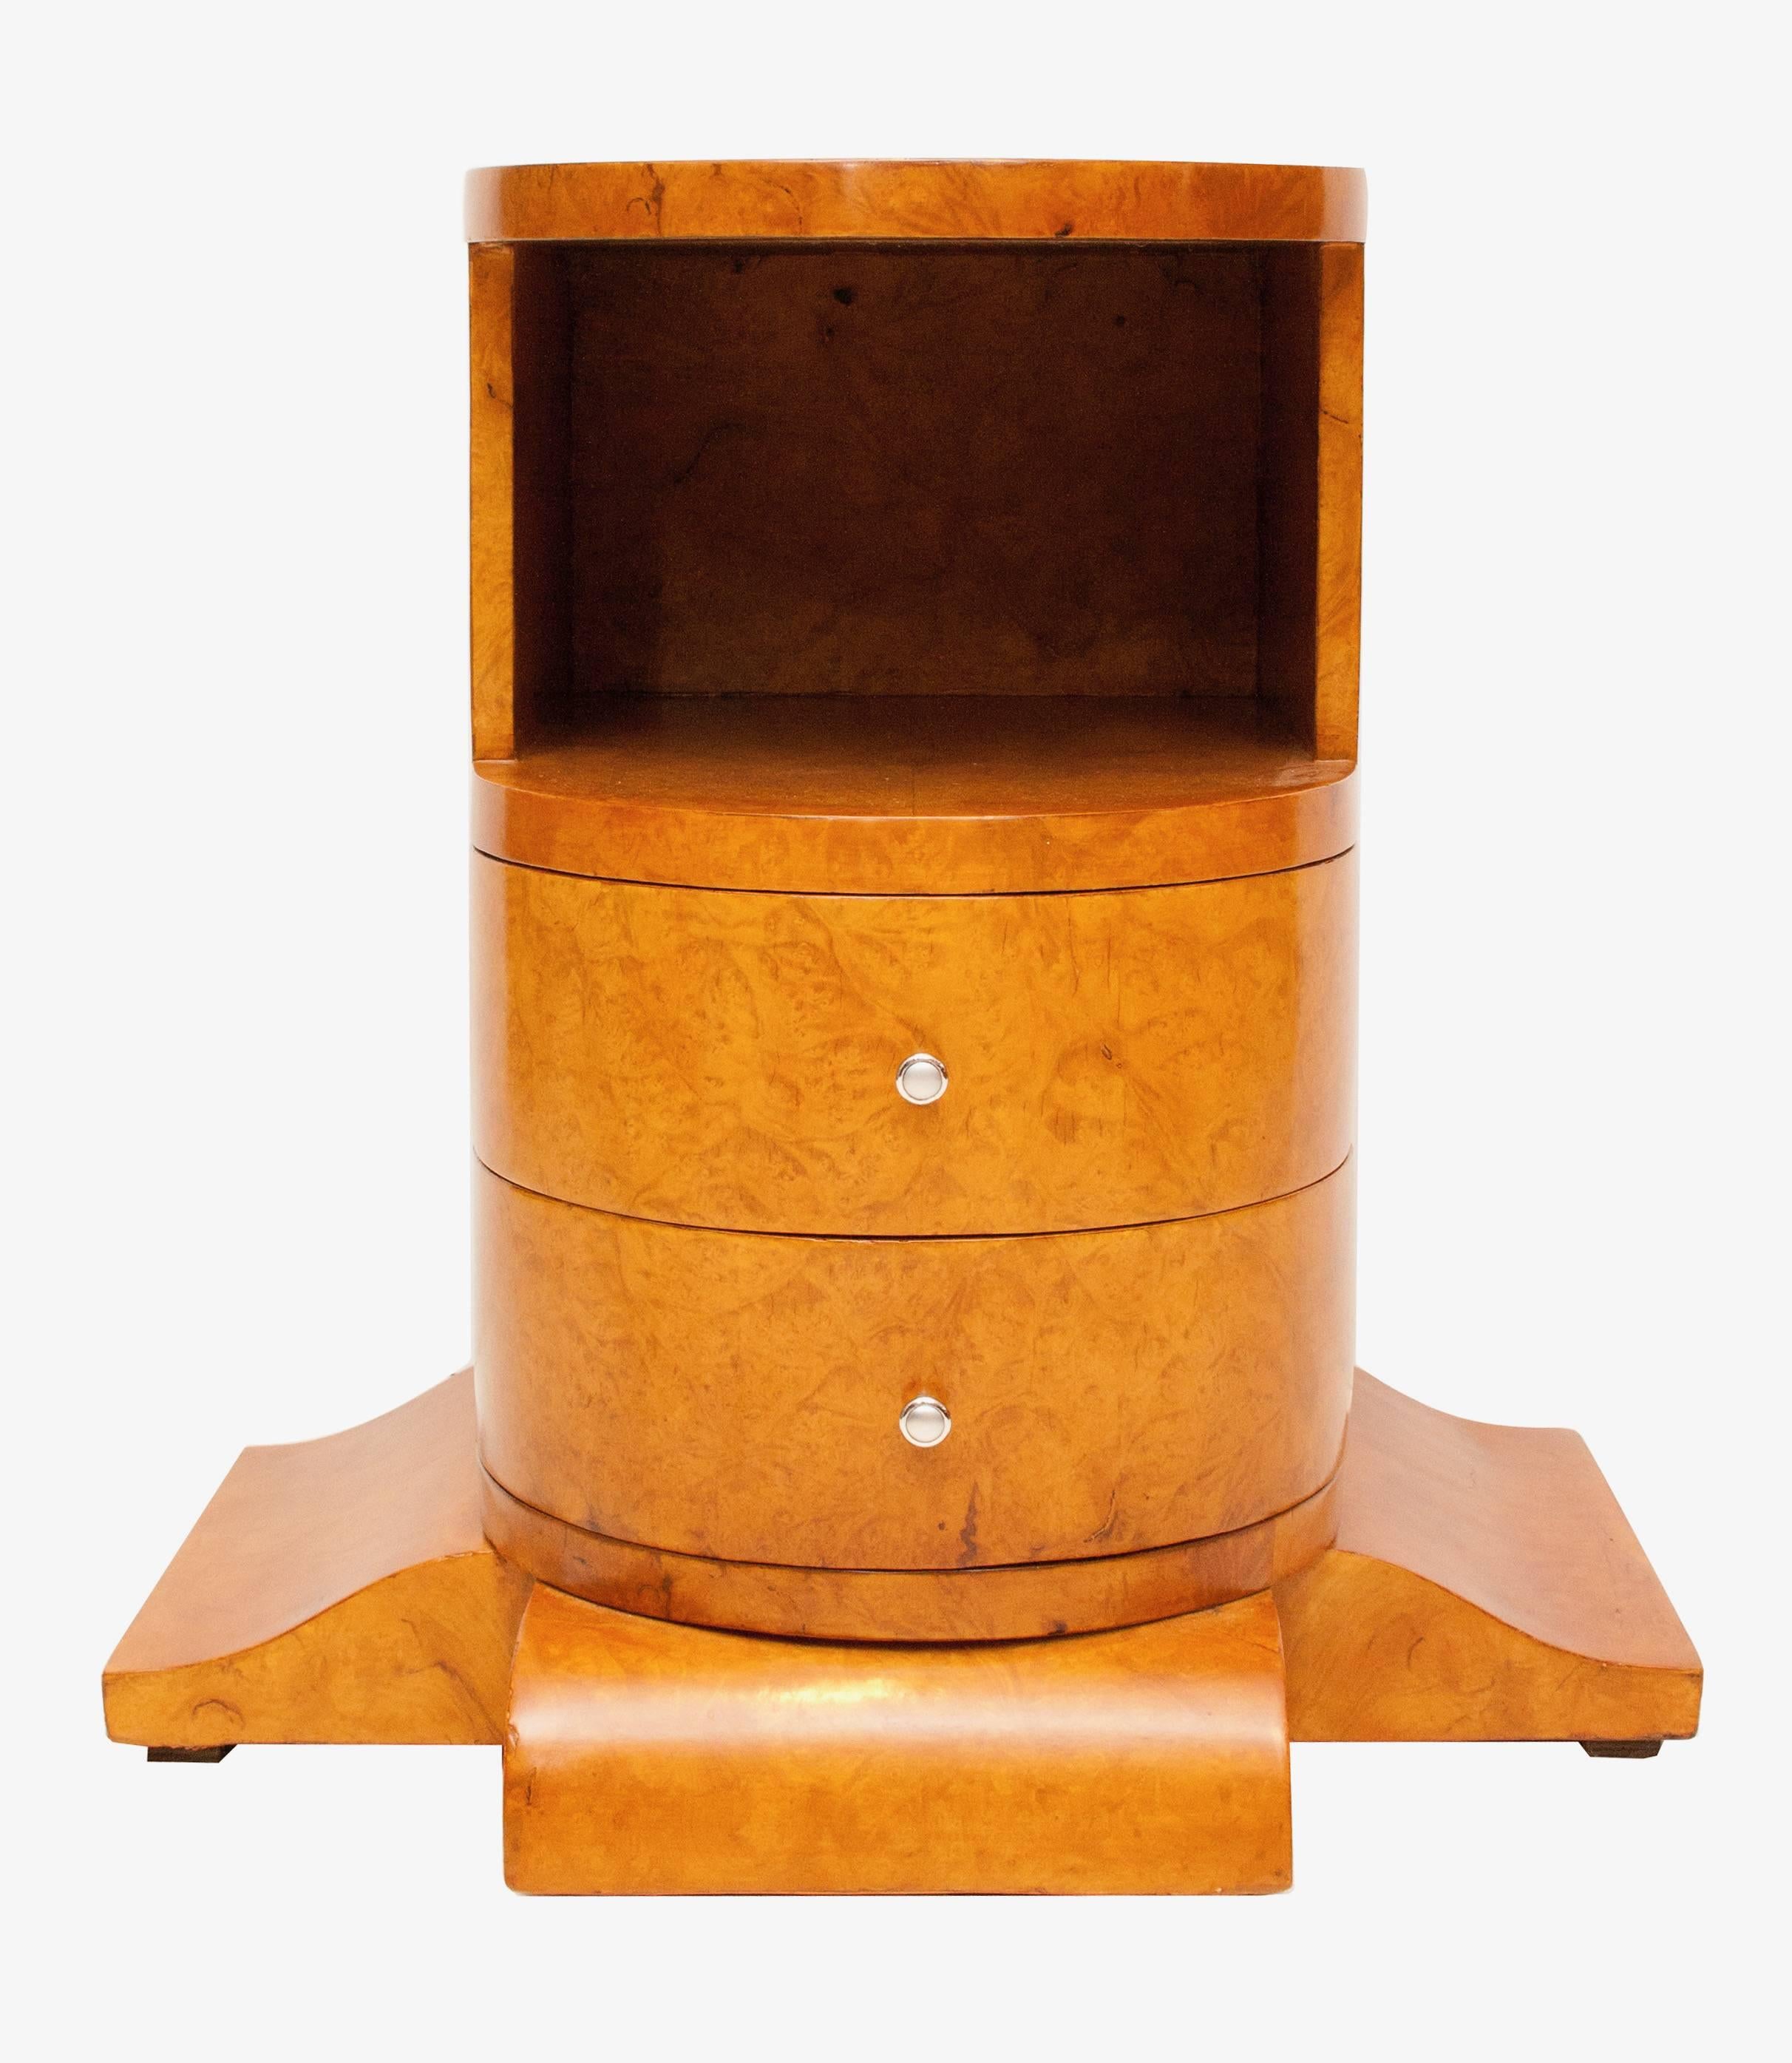 Art Deco bedside cabinet.
Art Deco side table in bird’s-eye maple.
Measures: 67.5 cm W at the base 52 cm D at the base 67 cm H
the top is 49 cm D and 37.5 cm W.